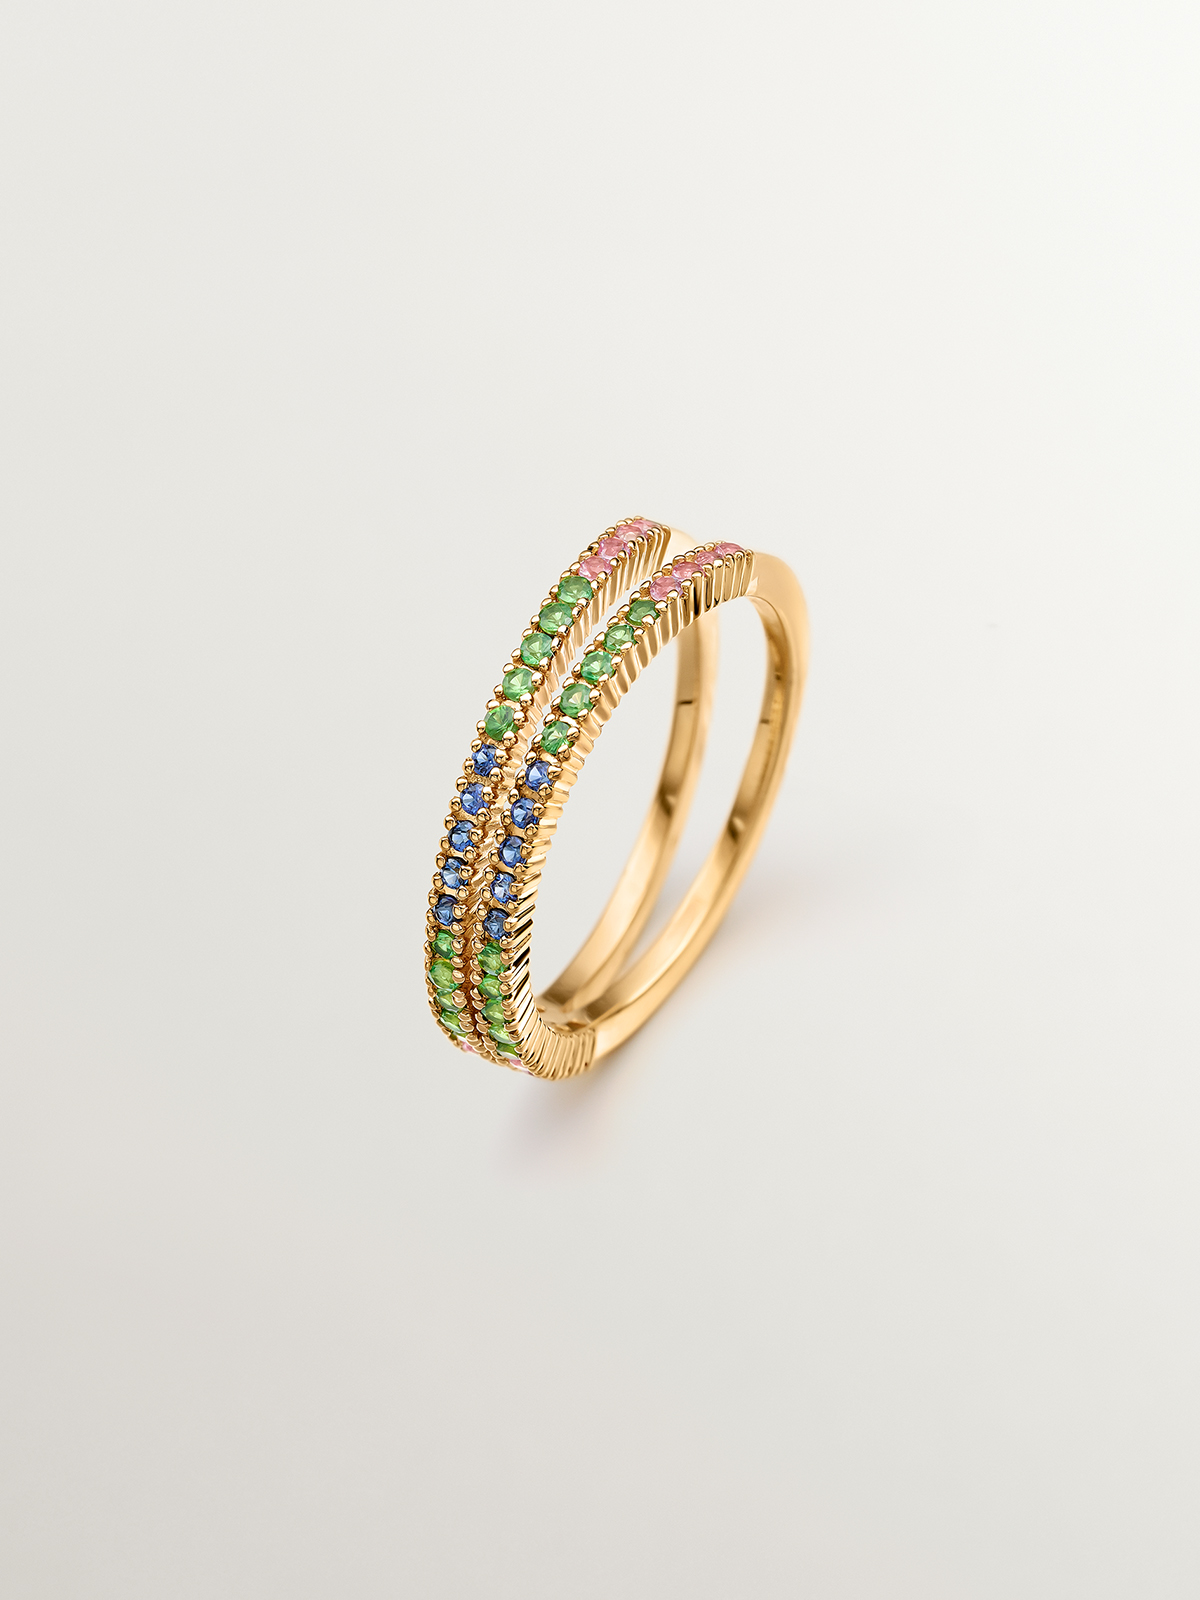 925 Silver Double Ring dipped in 18K yellow gold with tsavorites and multicolor sapphires.